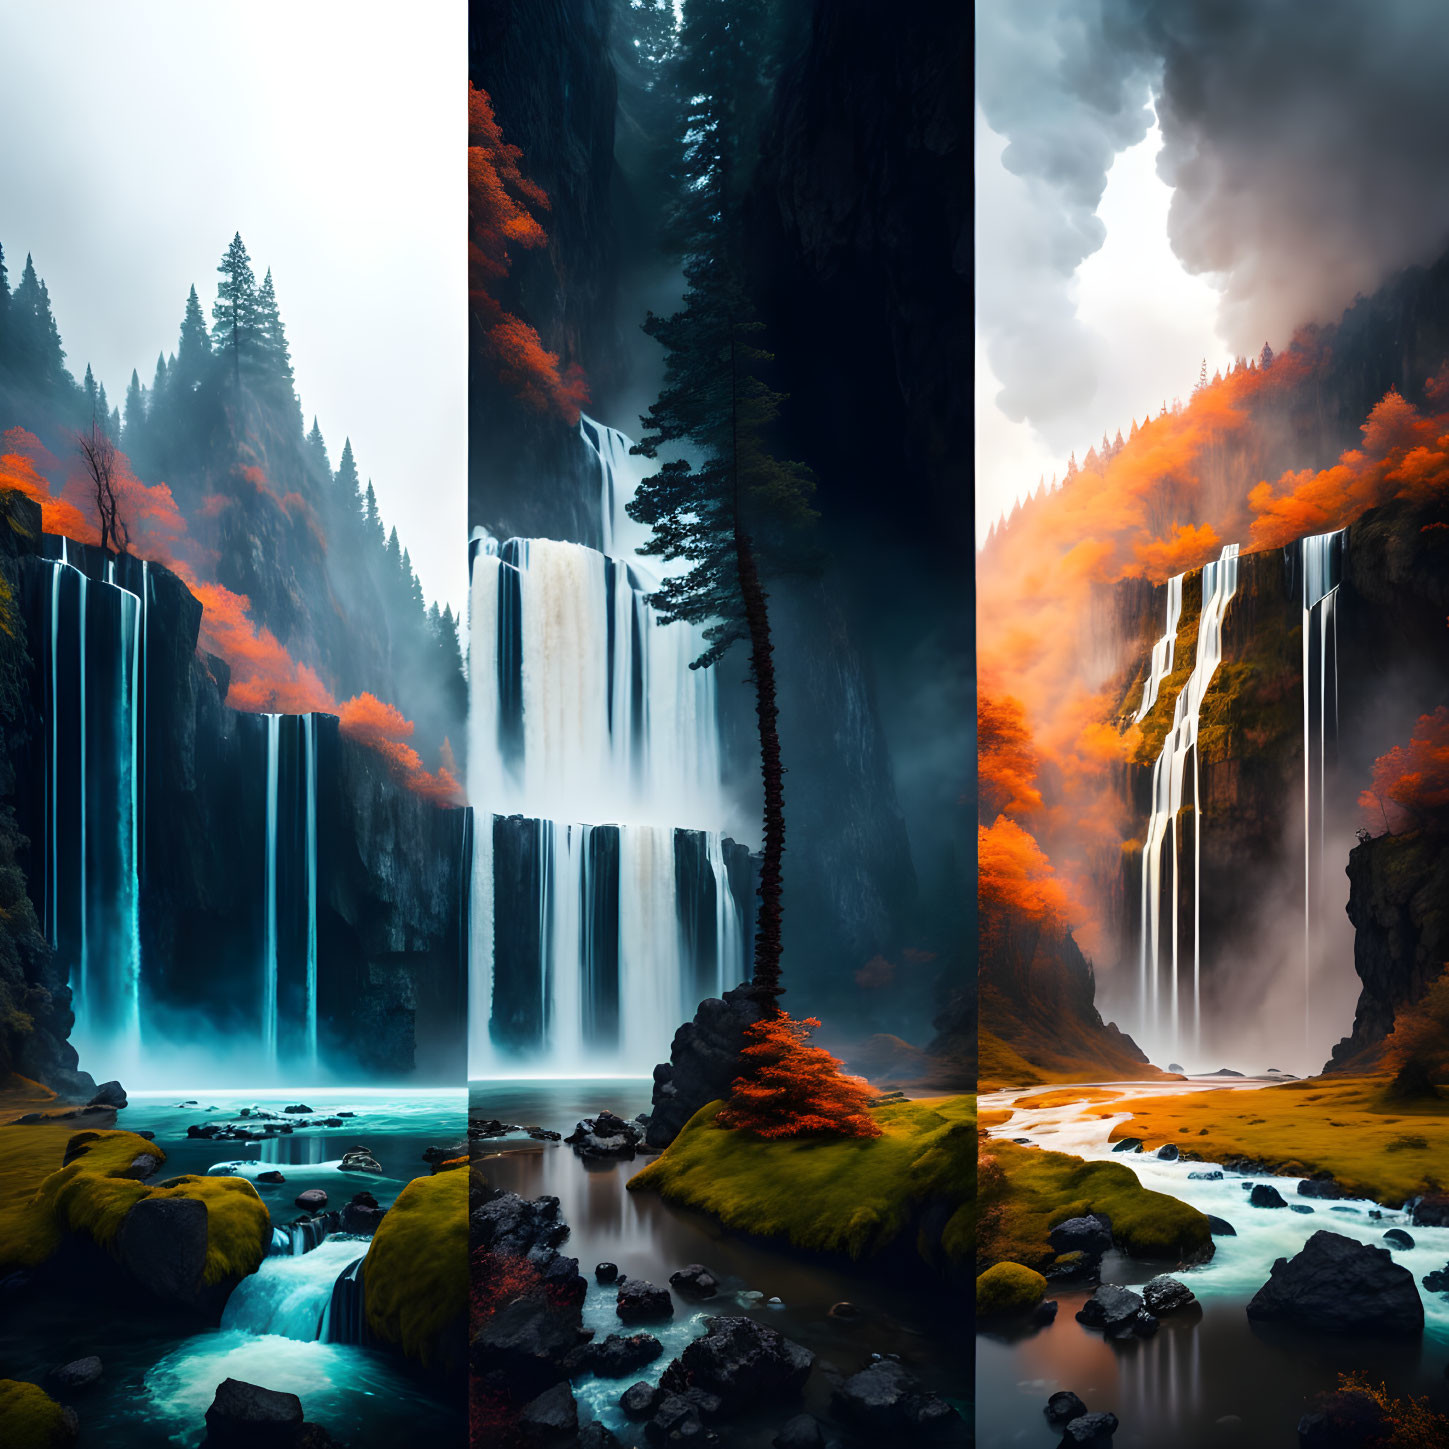 Majestic Waterfall Triptych with Autumn Foliage and Ethereal Lighting